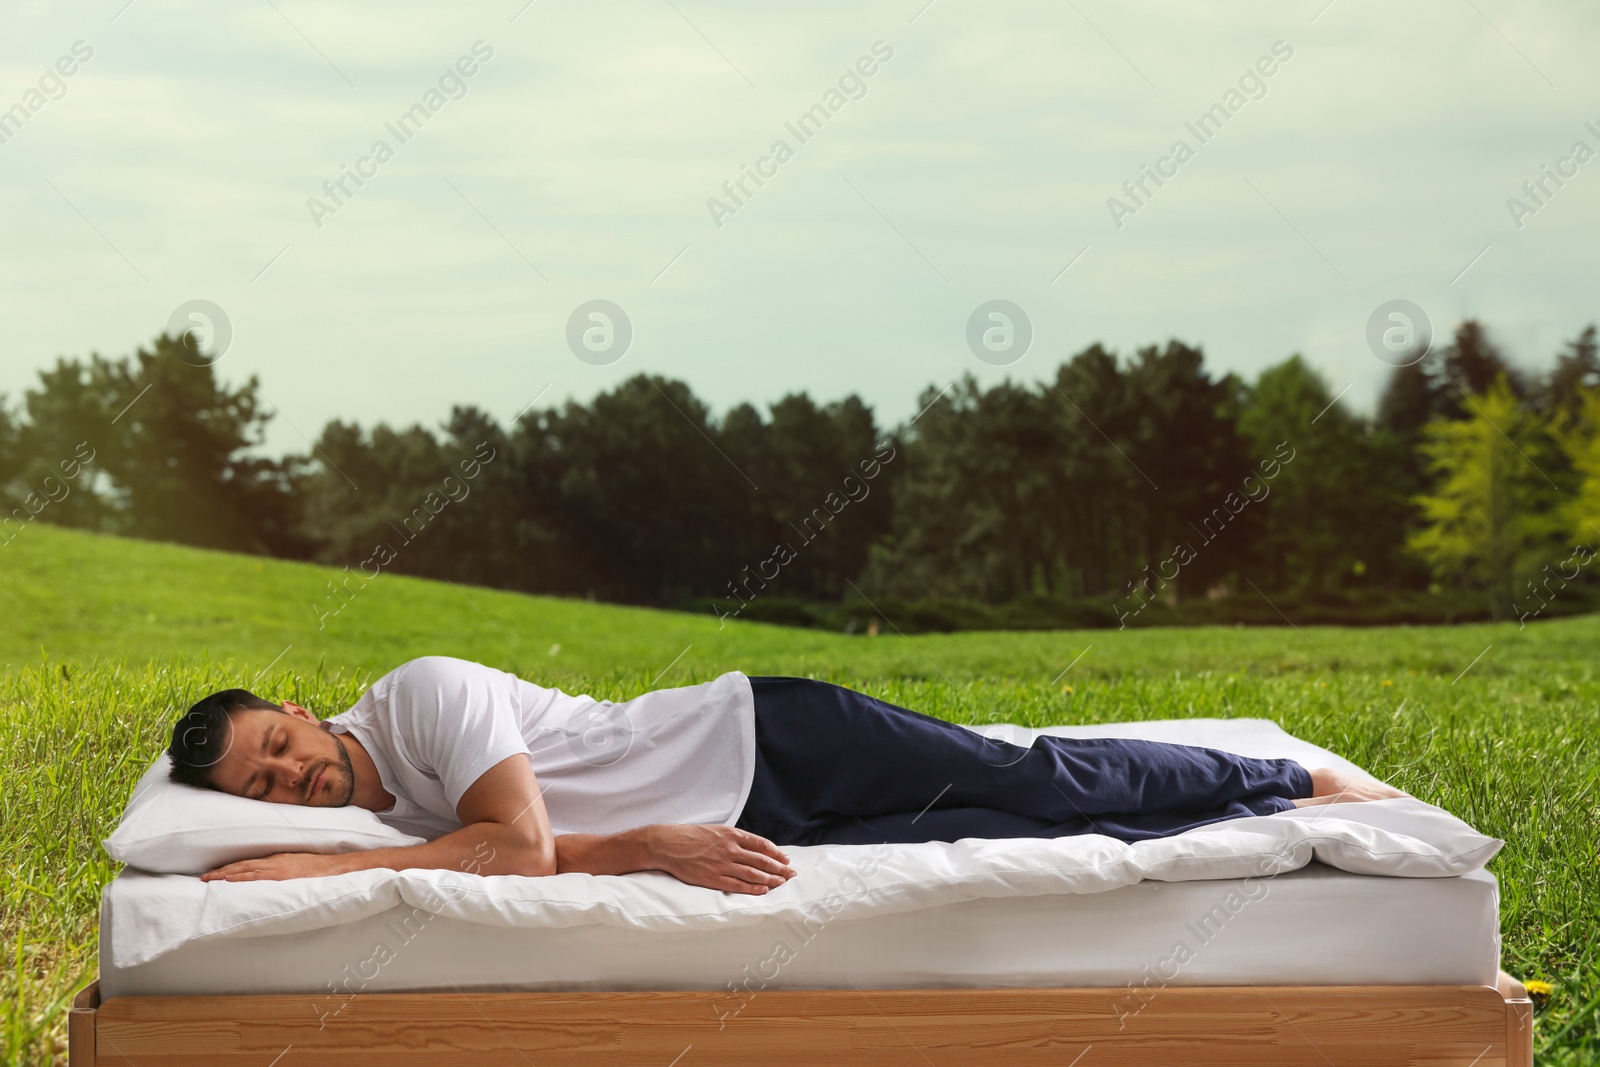 Image of Man sleeping on bed and beautiful view of green lawn on background. Sleep well - stay healthy